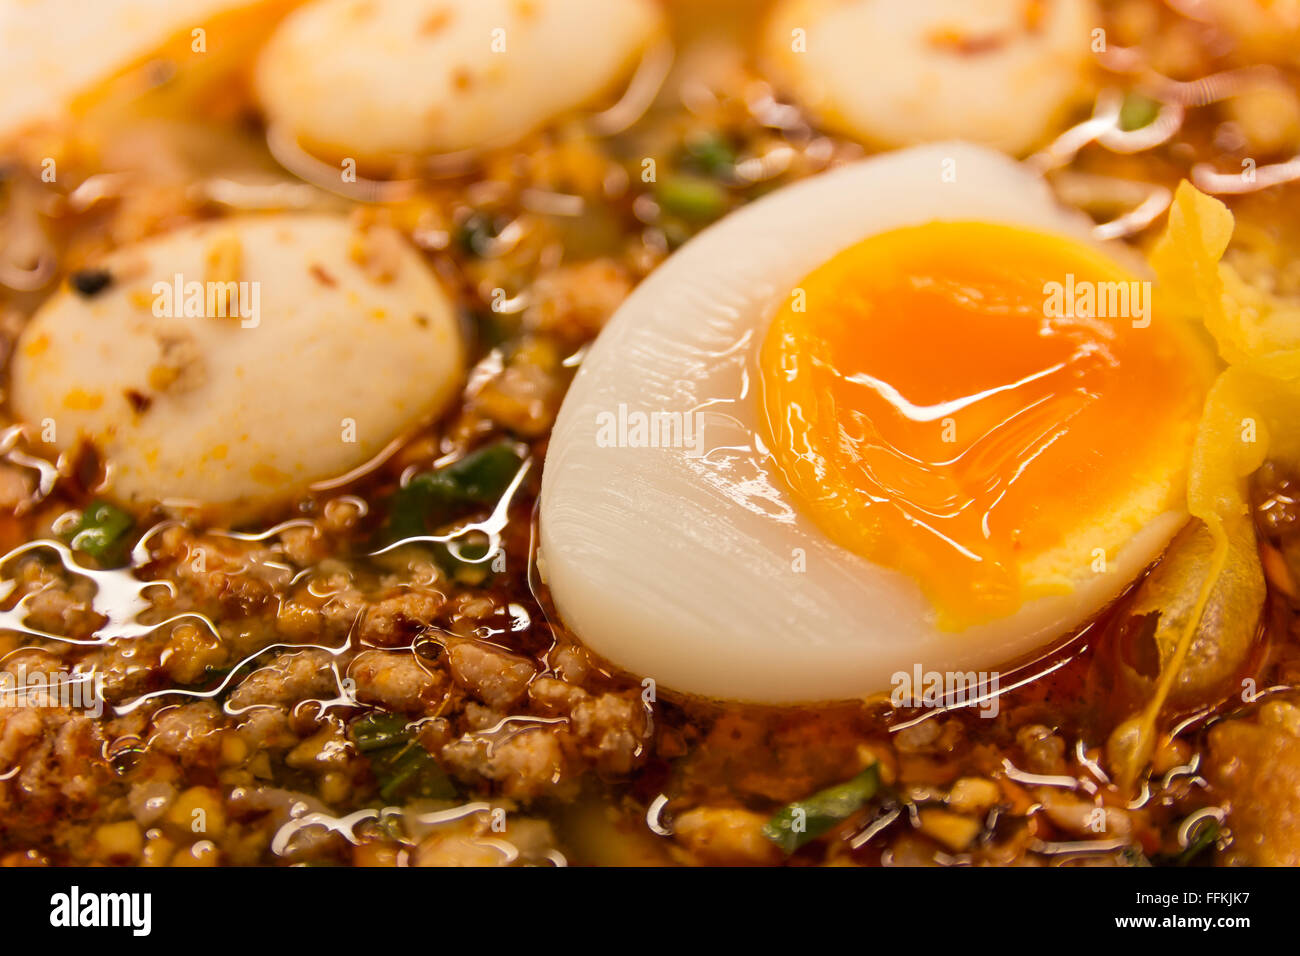 Pork rice noodle soup with meat ball, egg and vegetable Stock Photo